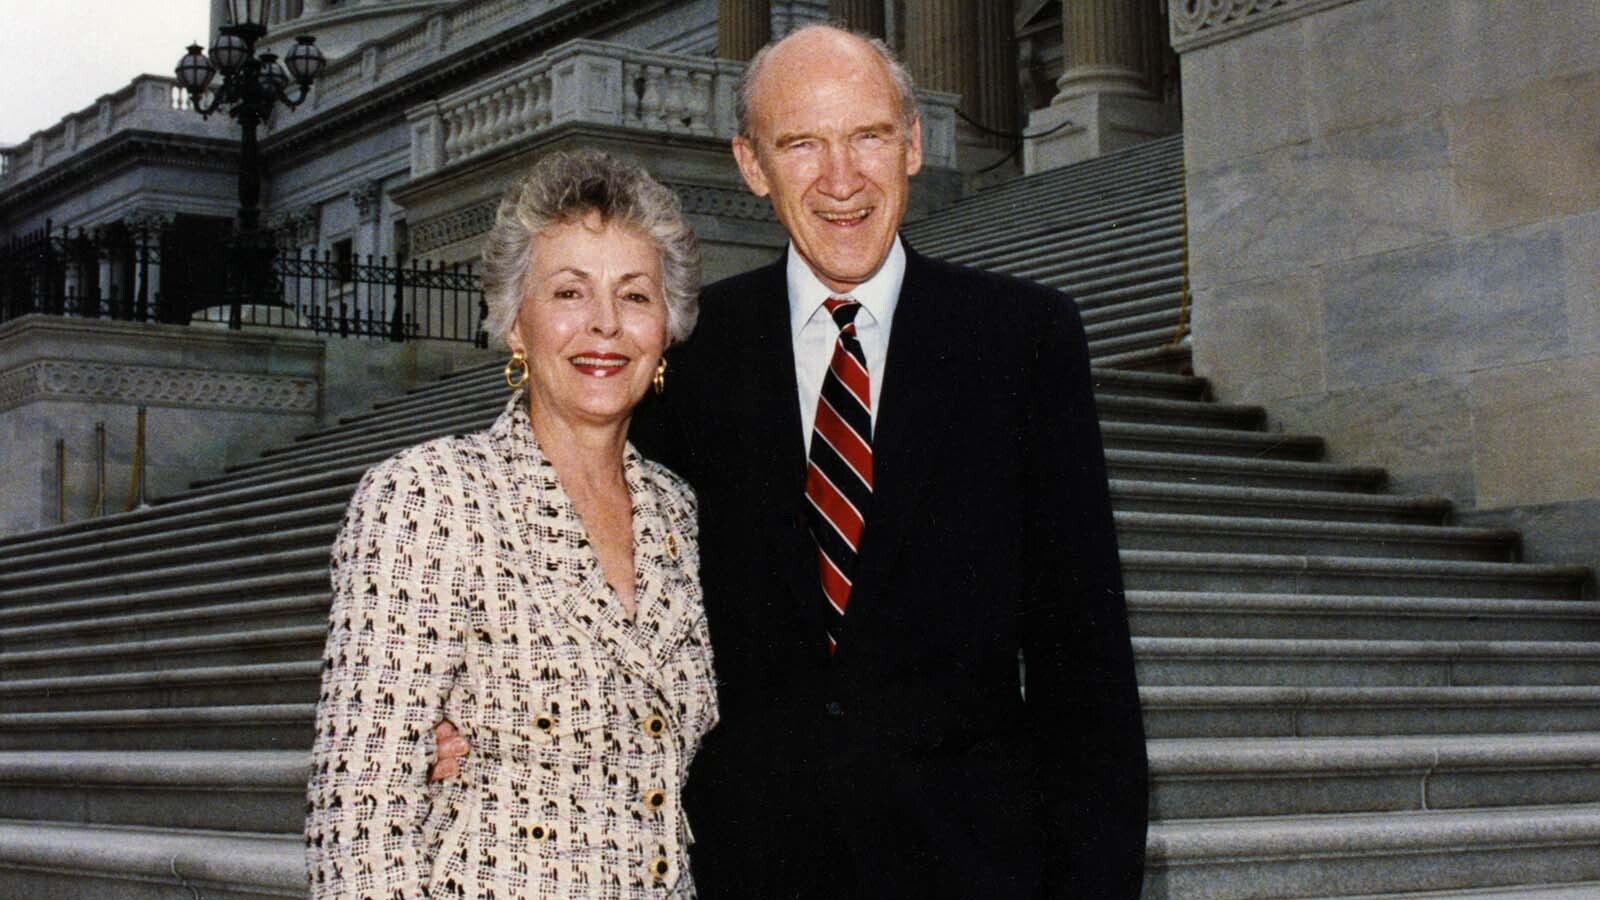 Alan Simpson served in the United States Senate from 1979 until 1997. Simpson and his wife, Ann, celebrate their 70th wedding anniversary this month.